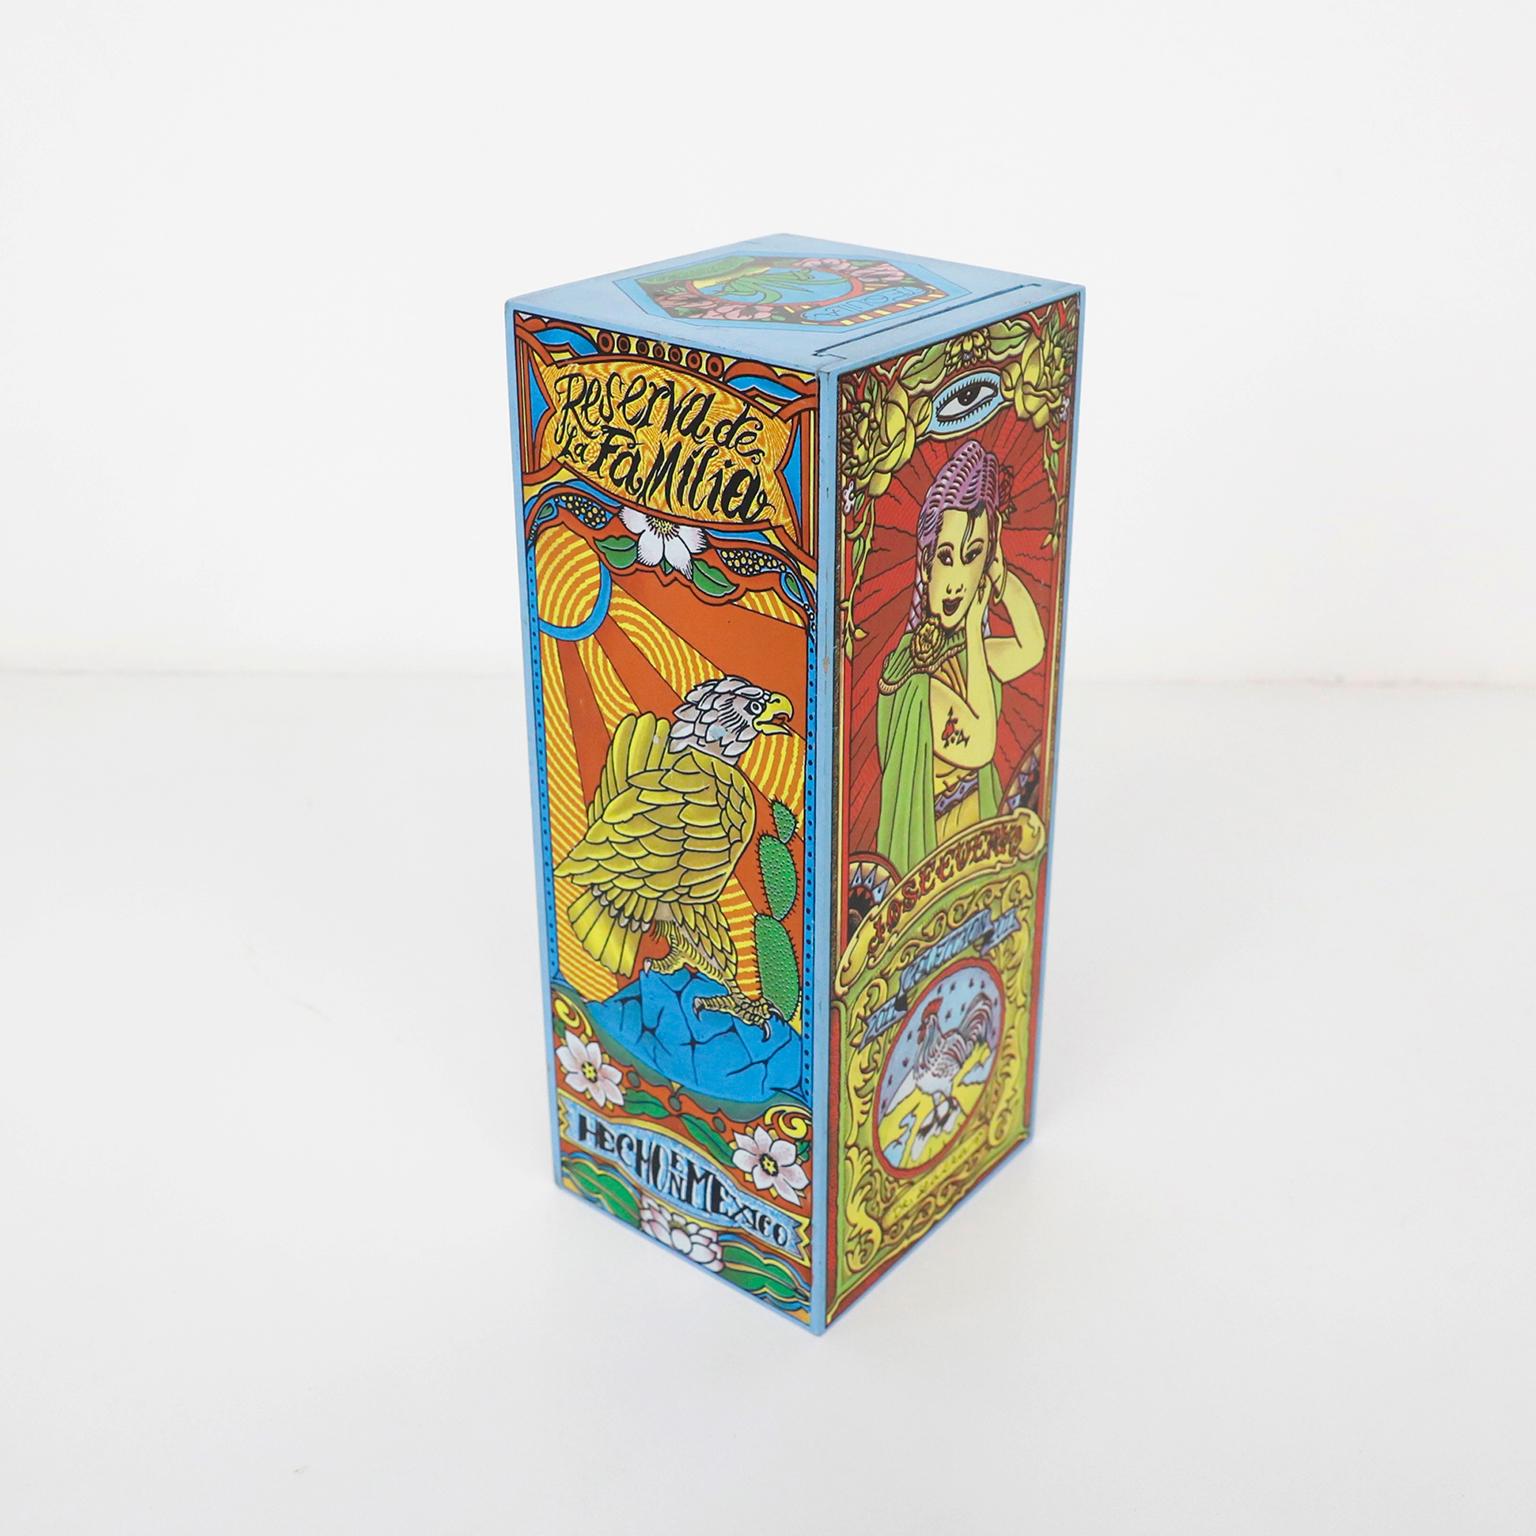 Awesome wood tequila box featuring Dr. Lakra art on every surface. Made to hold Jose Cuervo Tequila Reserva De La Familia, 2011. Very limited edition. Box can hold a bottle or be used as a stash box. Silk screen type printing. In excellent shape and